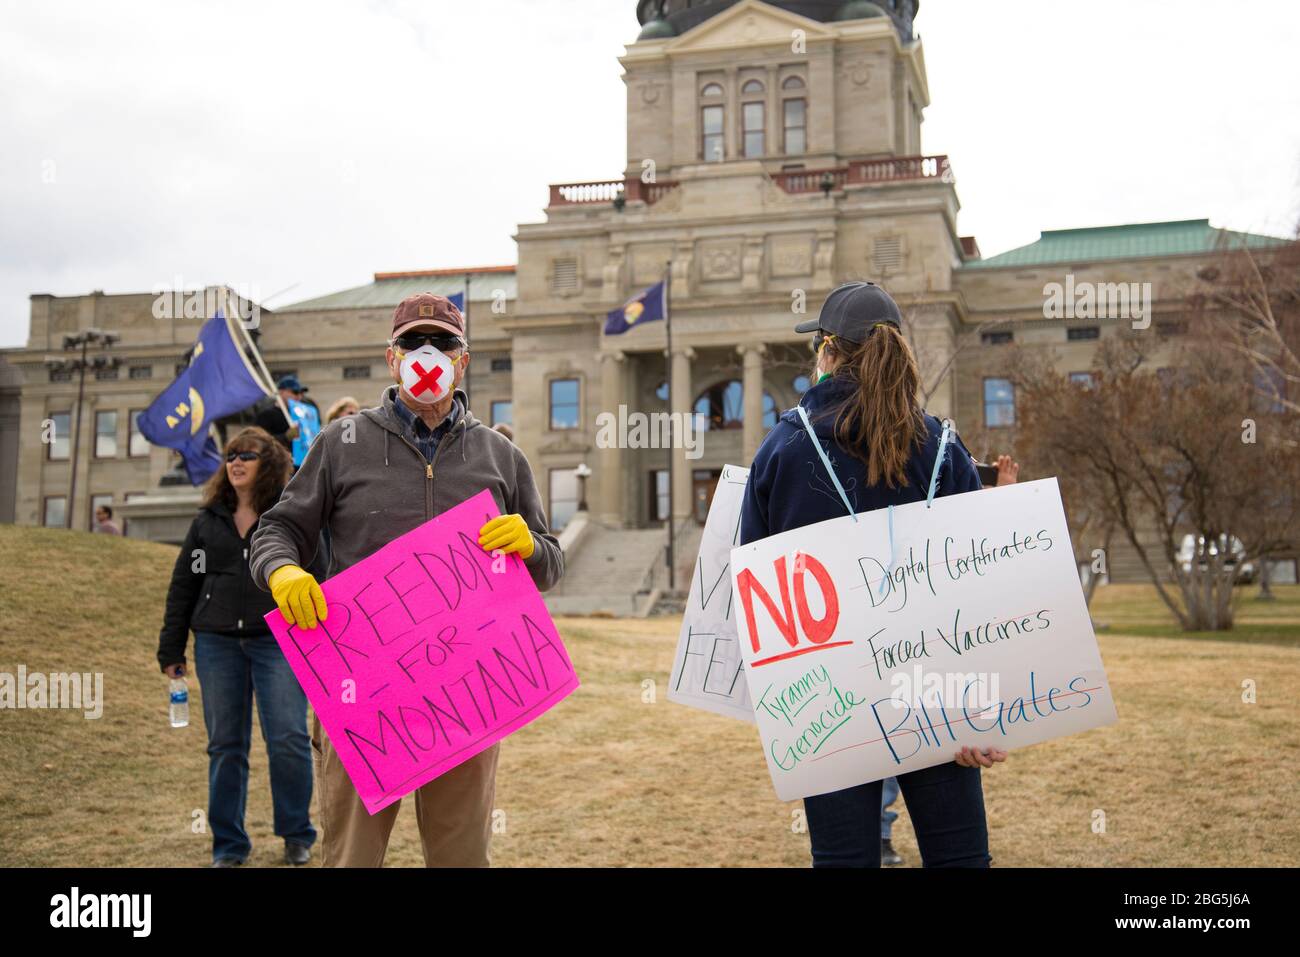 Helena, Montana - April 19, 2020: Demonstrators at a protest in the Capitol wearing masks, gloves, and holding signs for freedom and against vaccines, Stock Photo